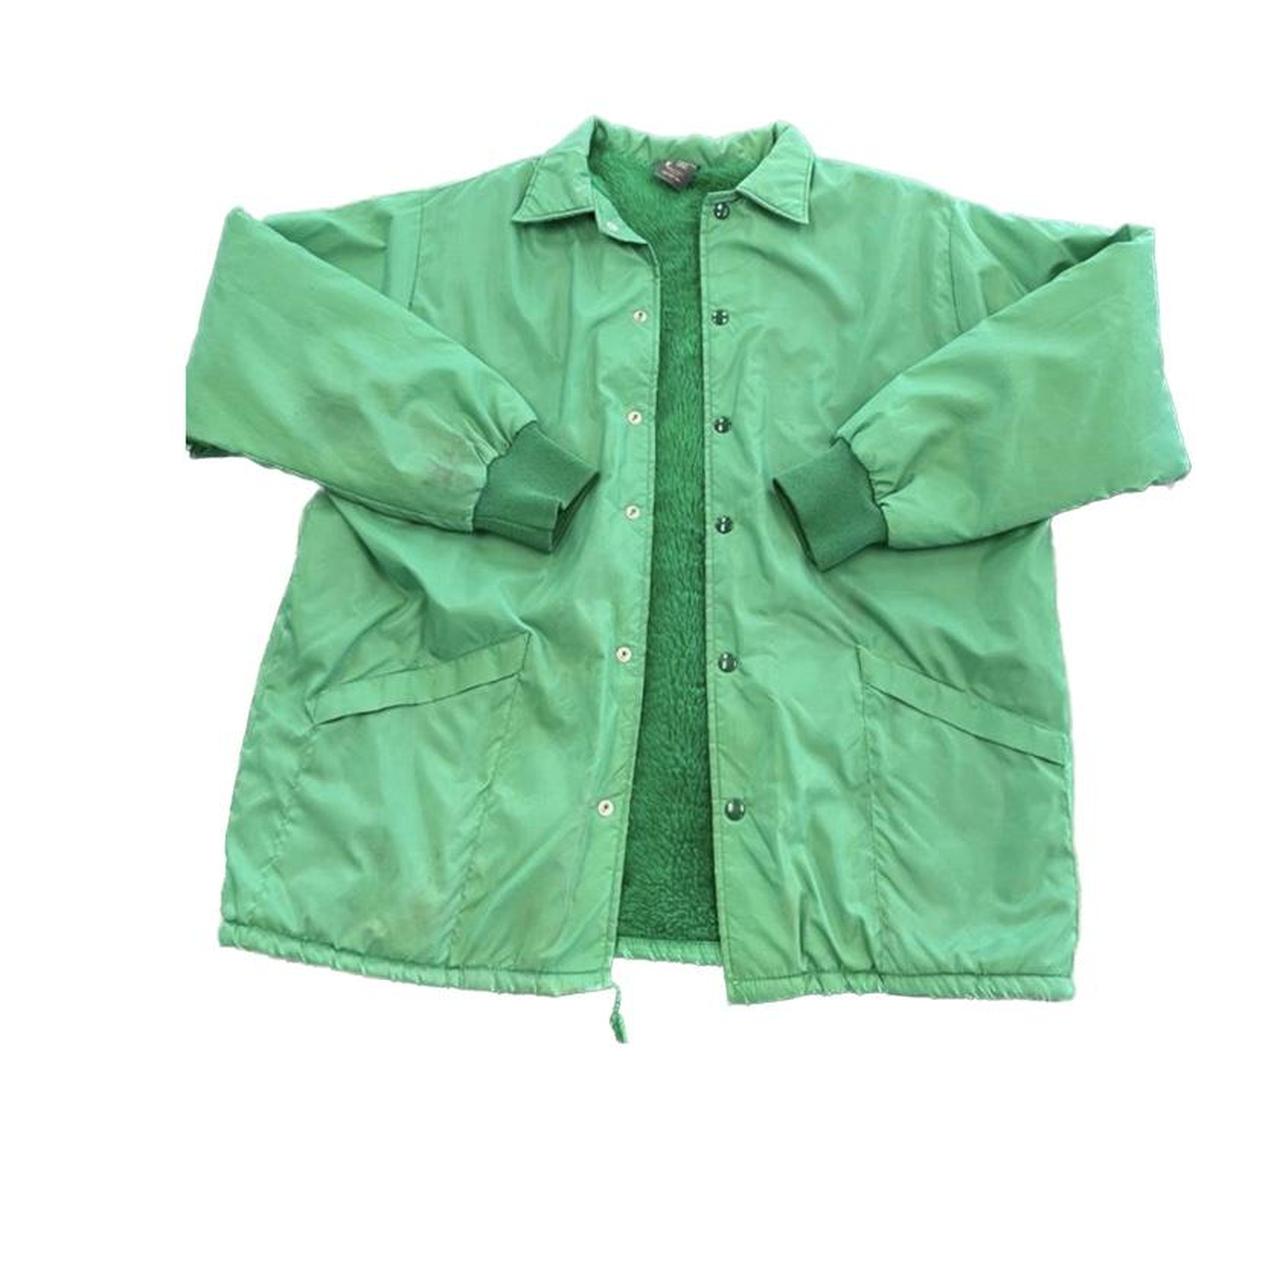 Aristoc Men's Green and White Jacket